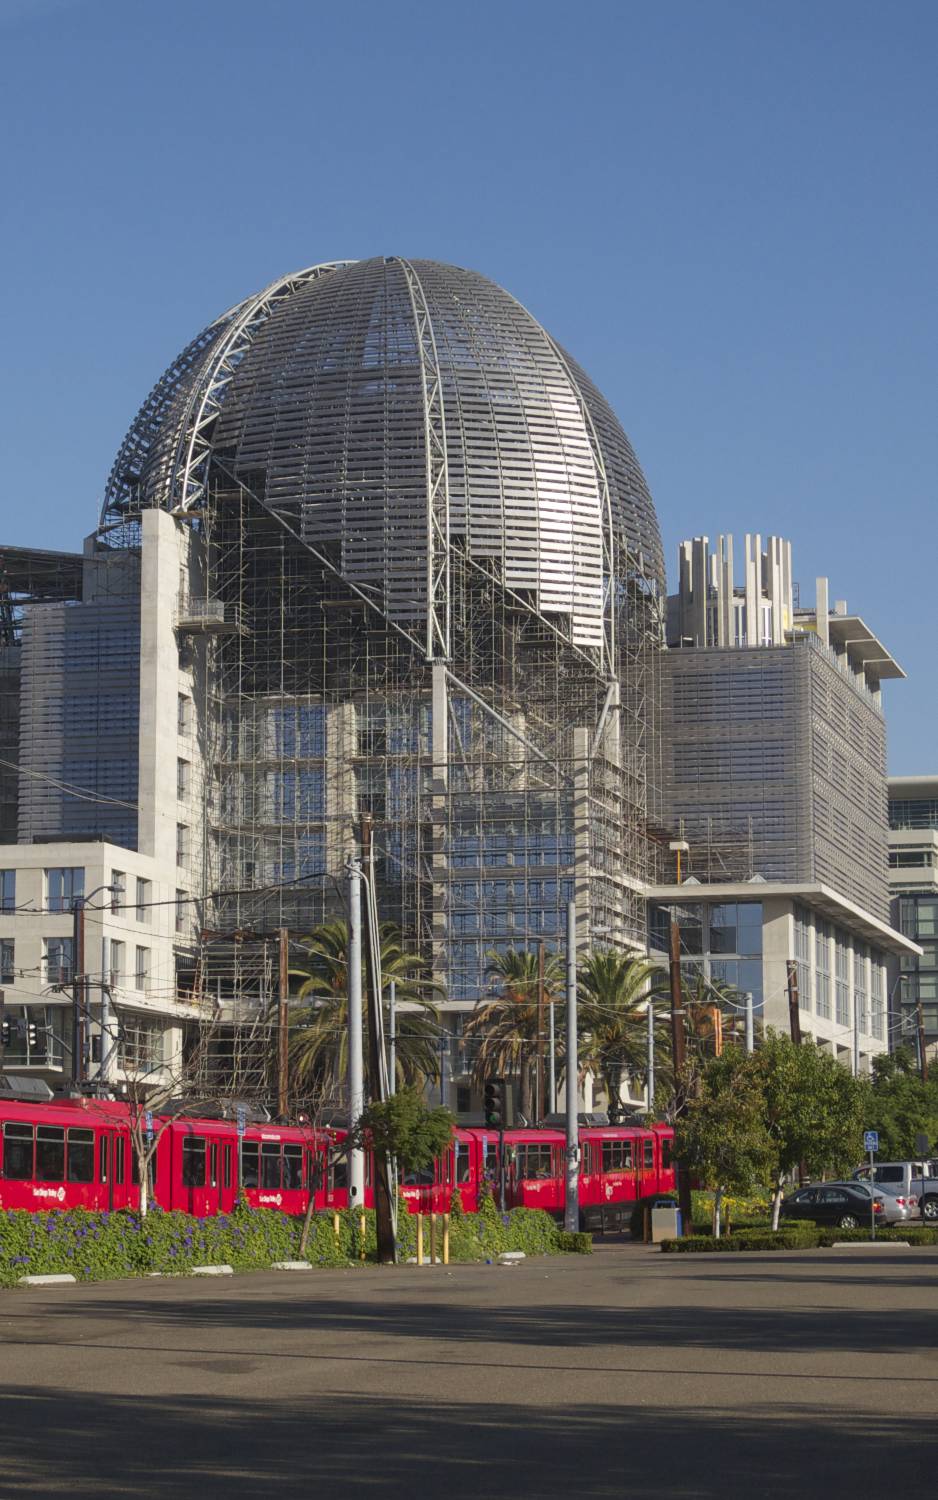 San Diego Main Public Library Dome, San Diego - 12 award-winning structural steel buildings